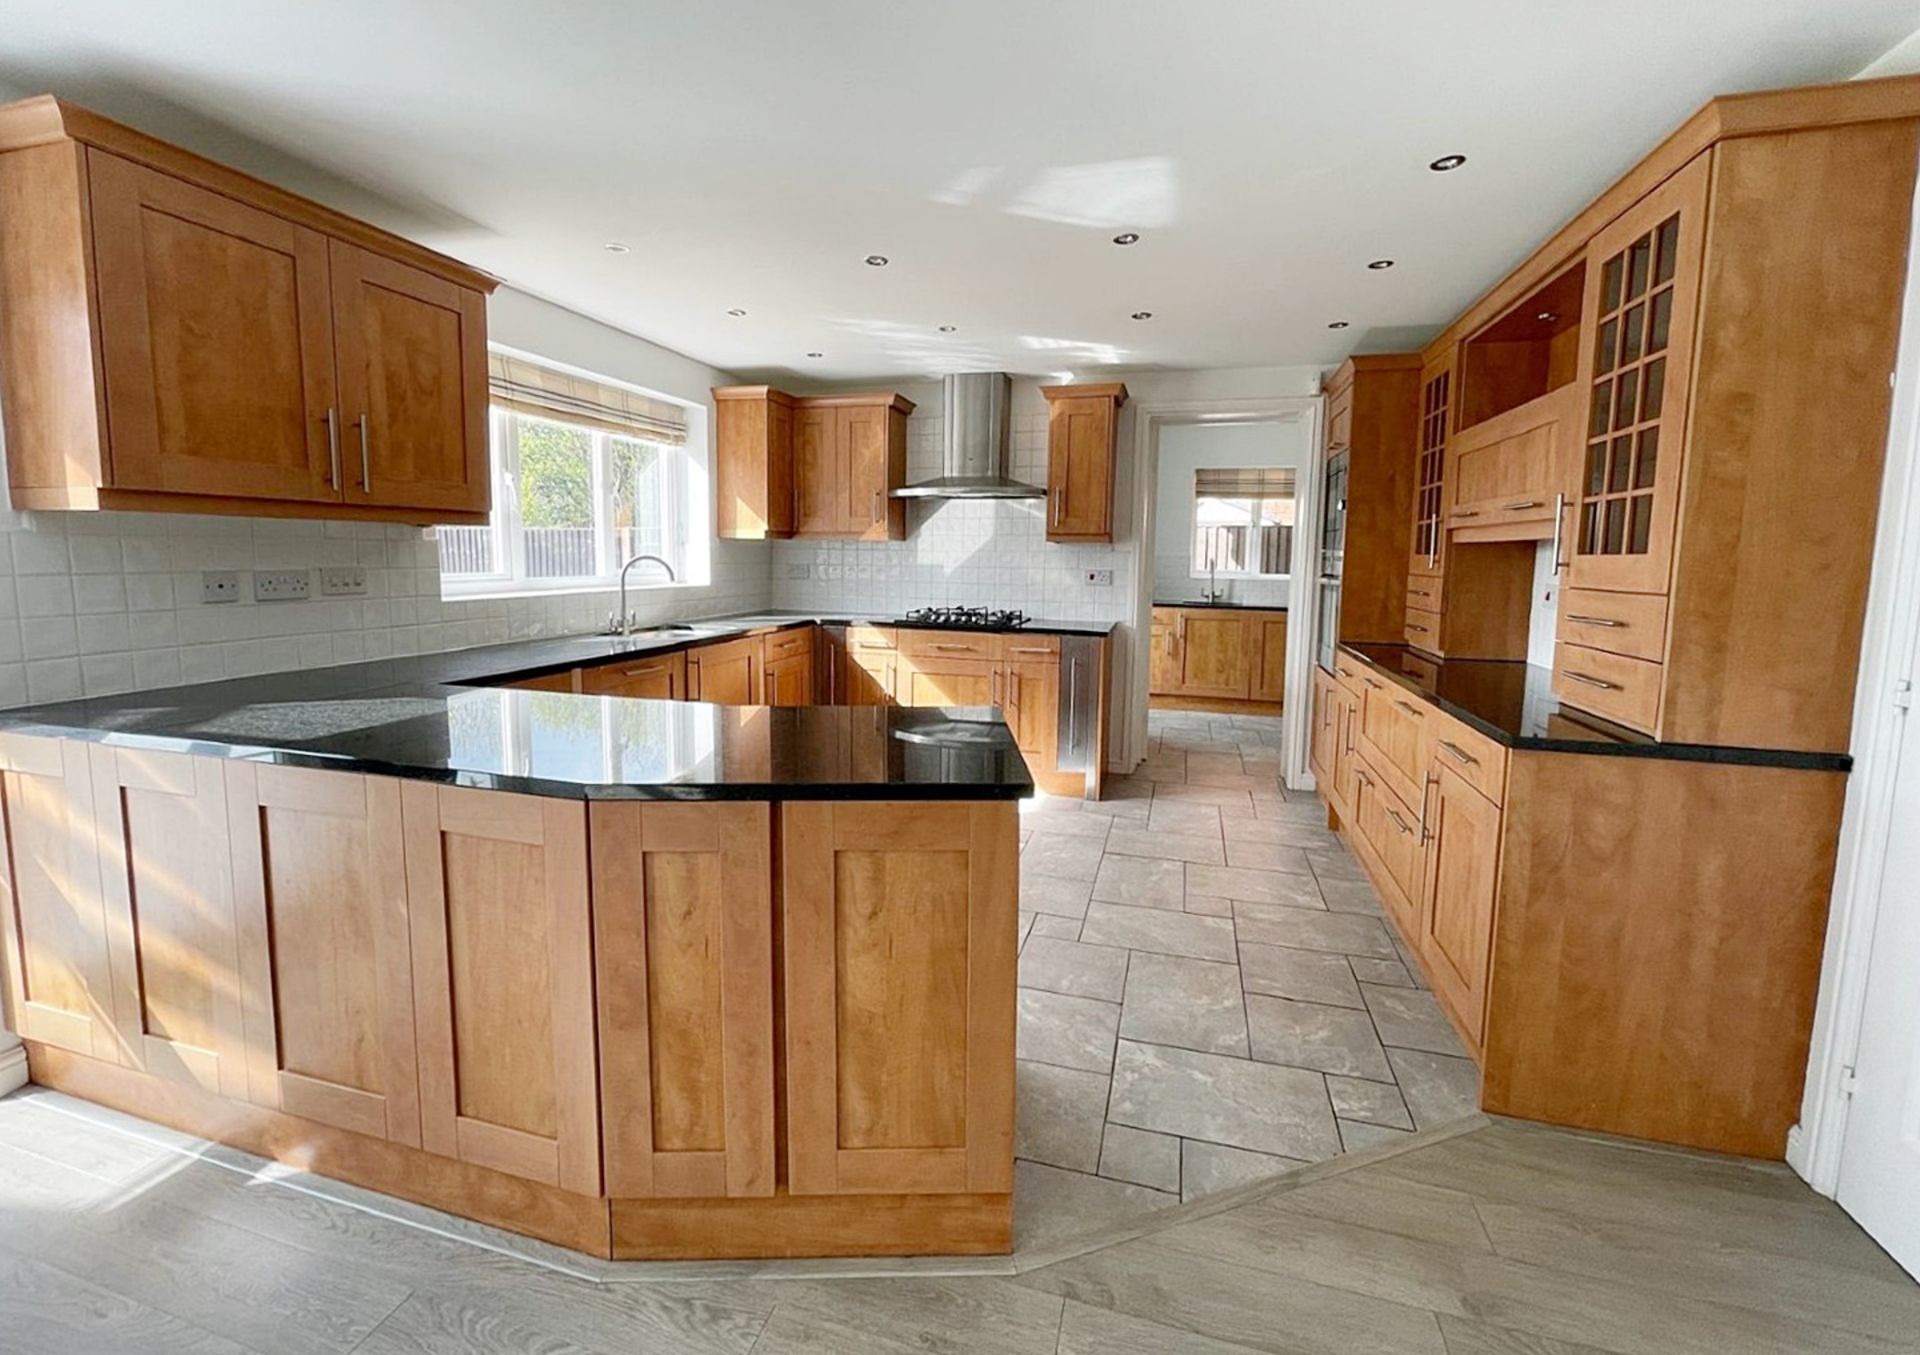 1 x Shaker-style, Feature-rich Fitted Kitchen with Solid Wood Doors, Granite Worktops and Appliances